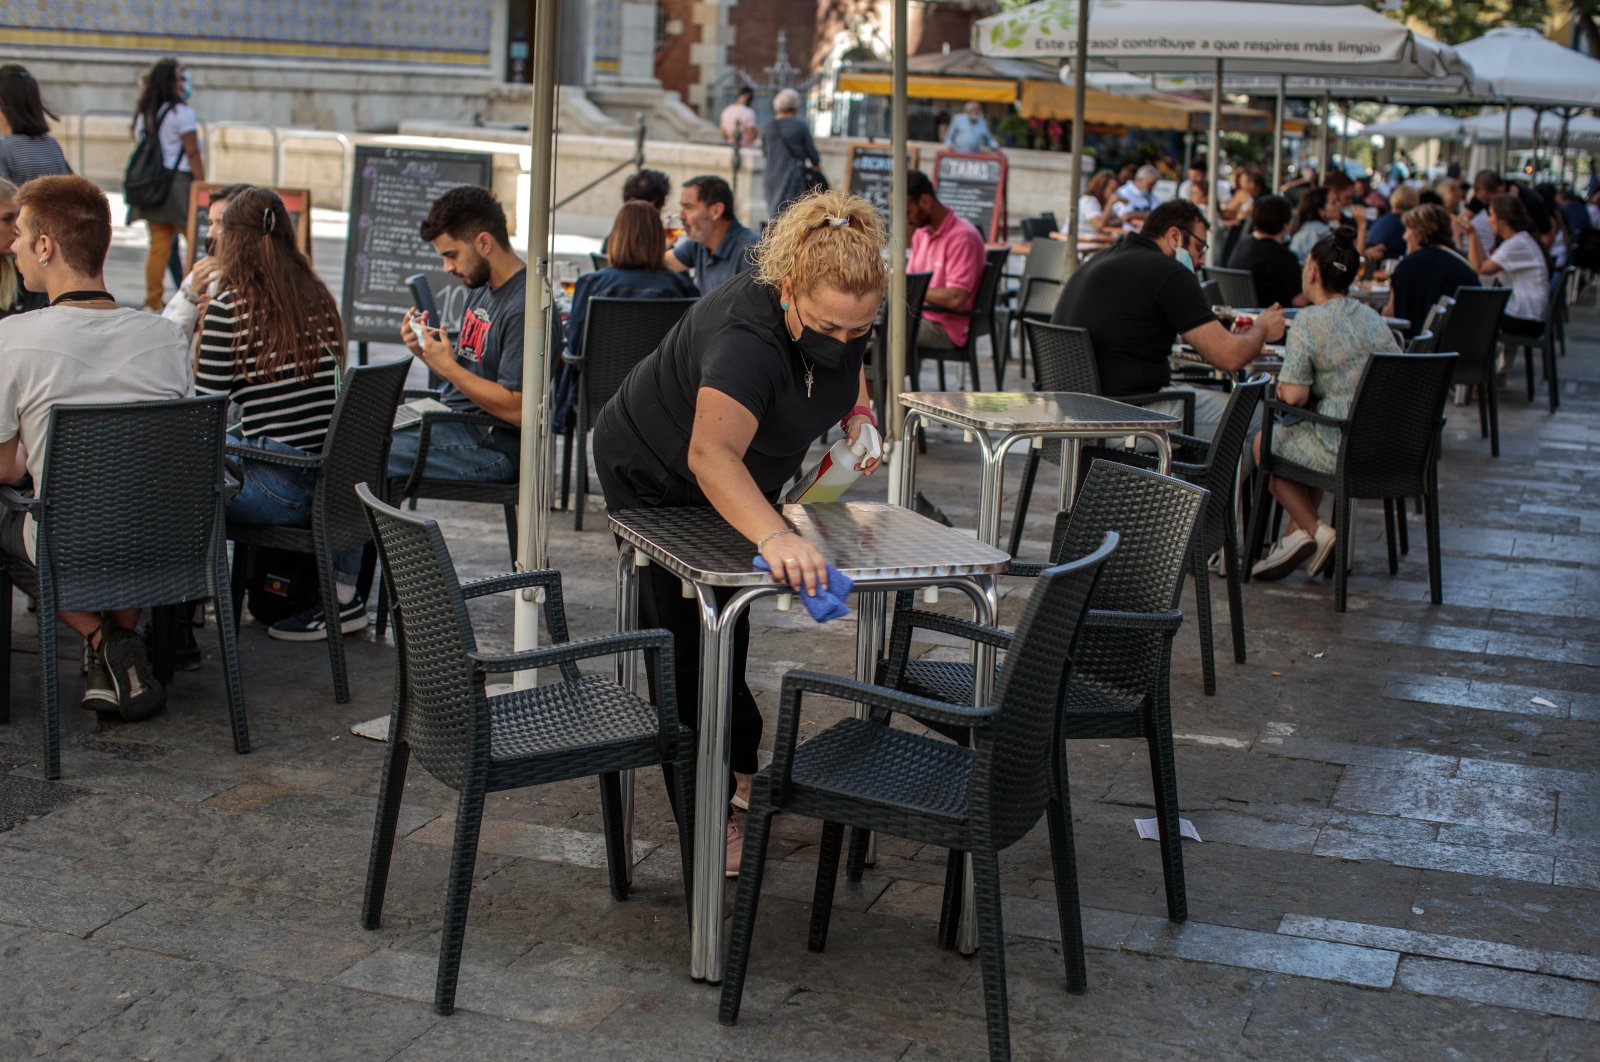 A waitress disinfects a table at a bar terrace in Valencia, Spain, Sept. 29, 2020. (EPA Photo)